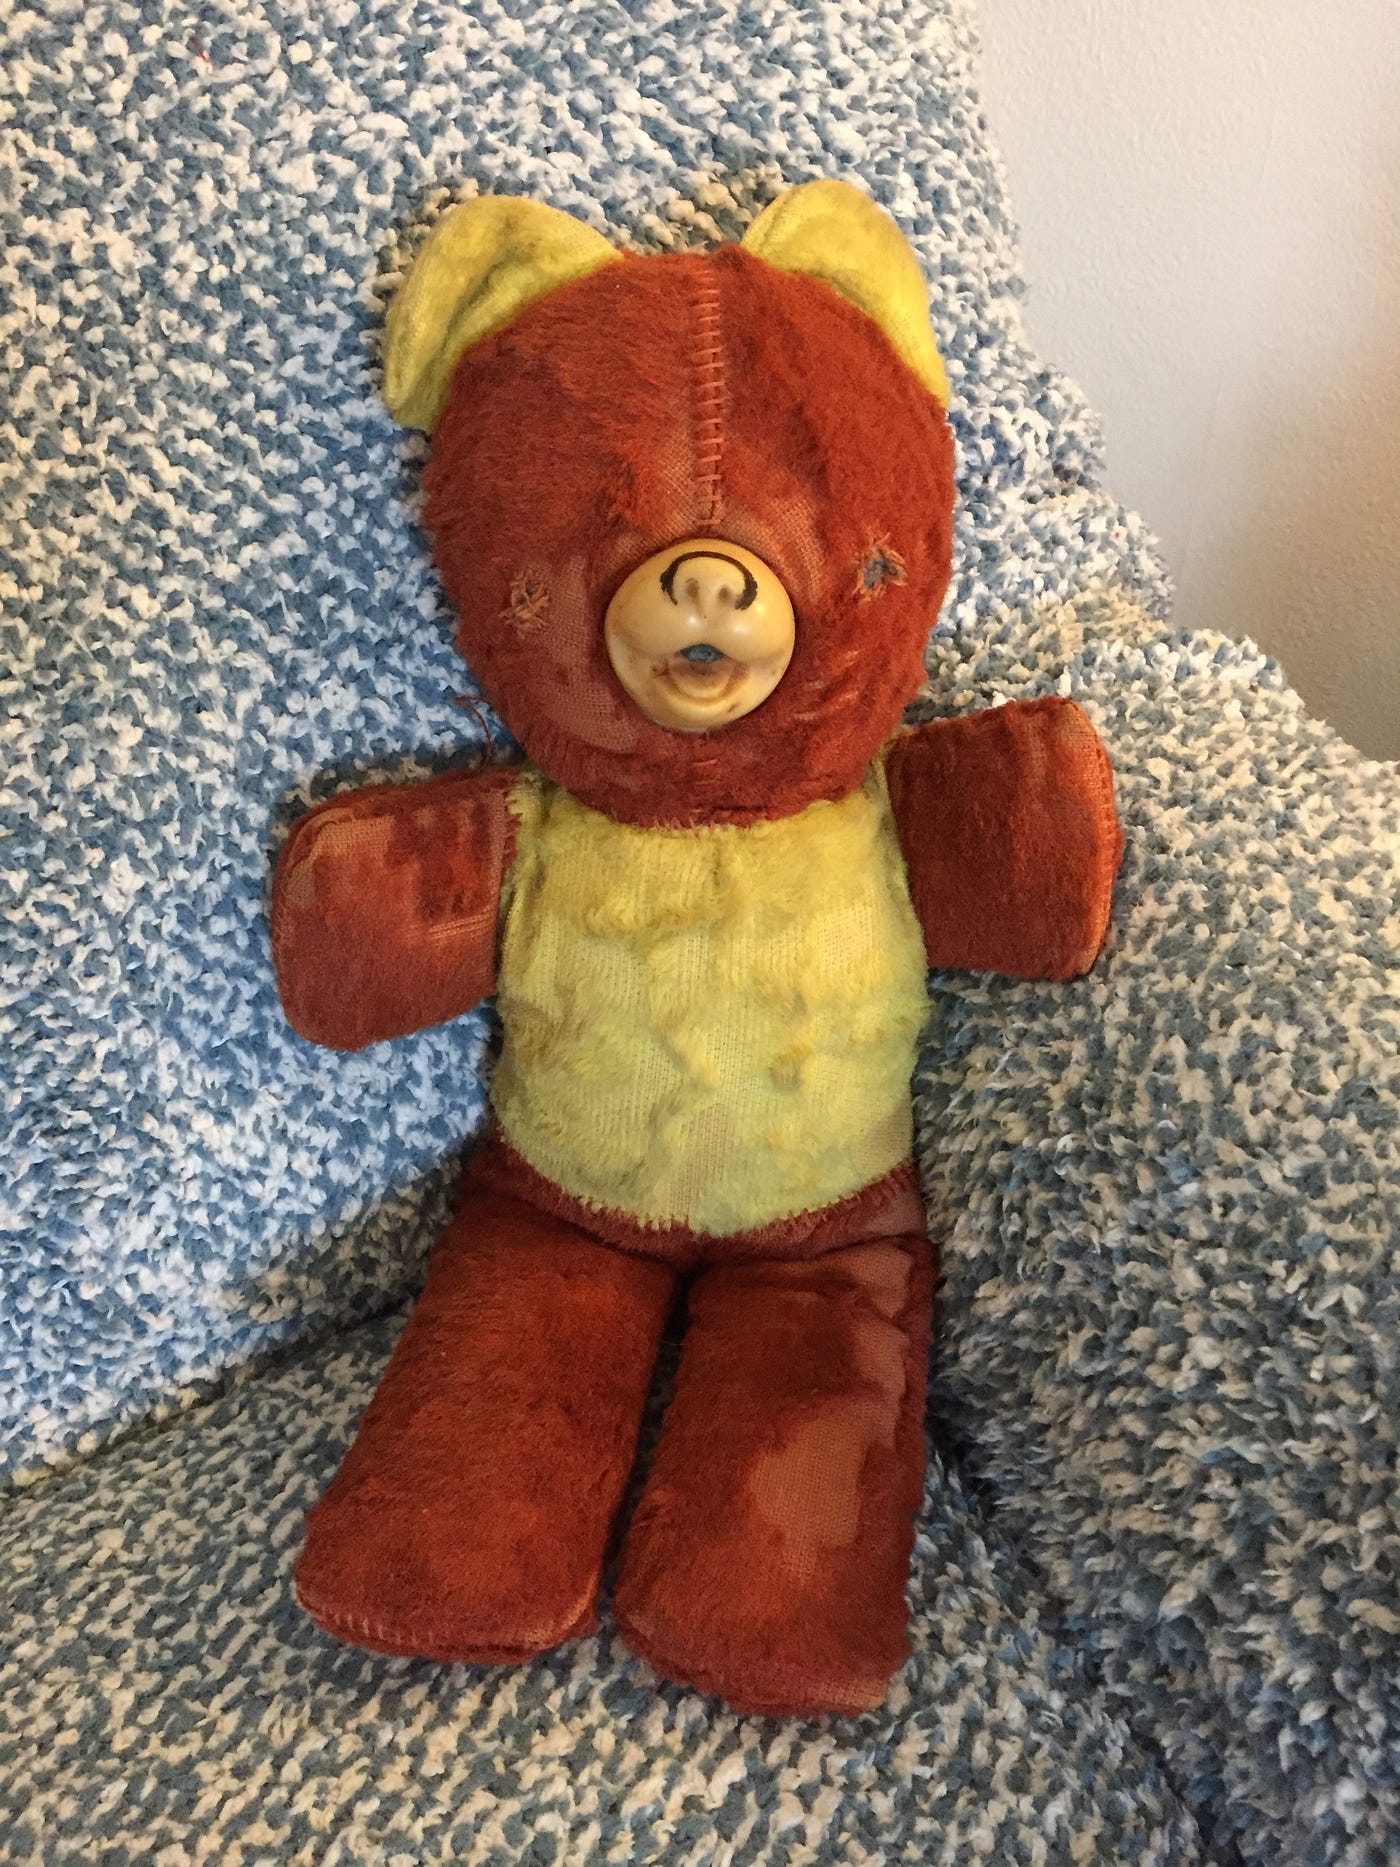 My old Teddy Bear, missing his eyes and obviously well-loved